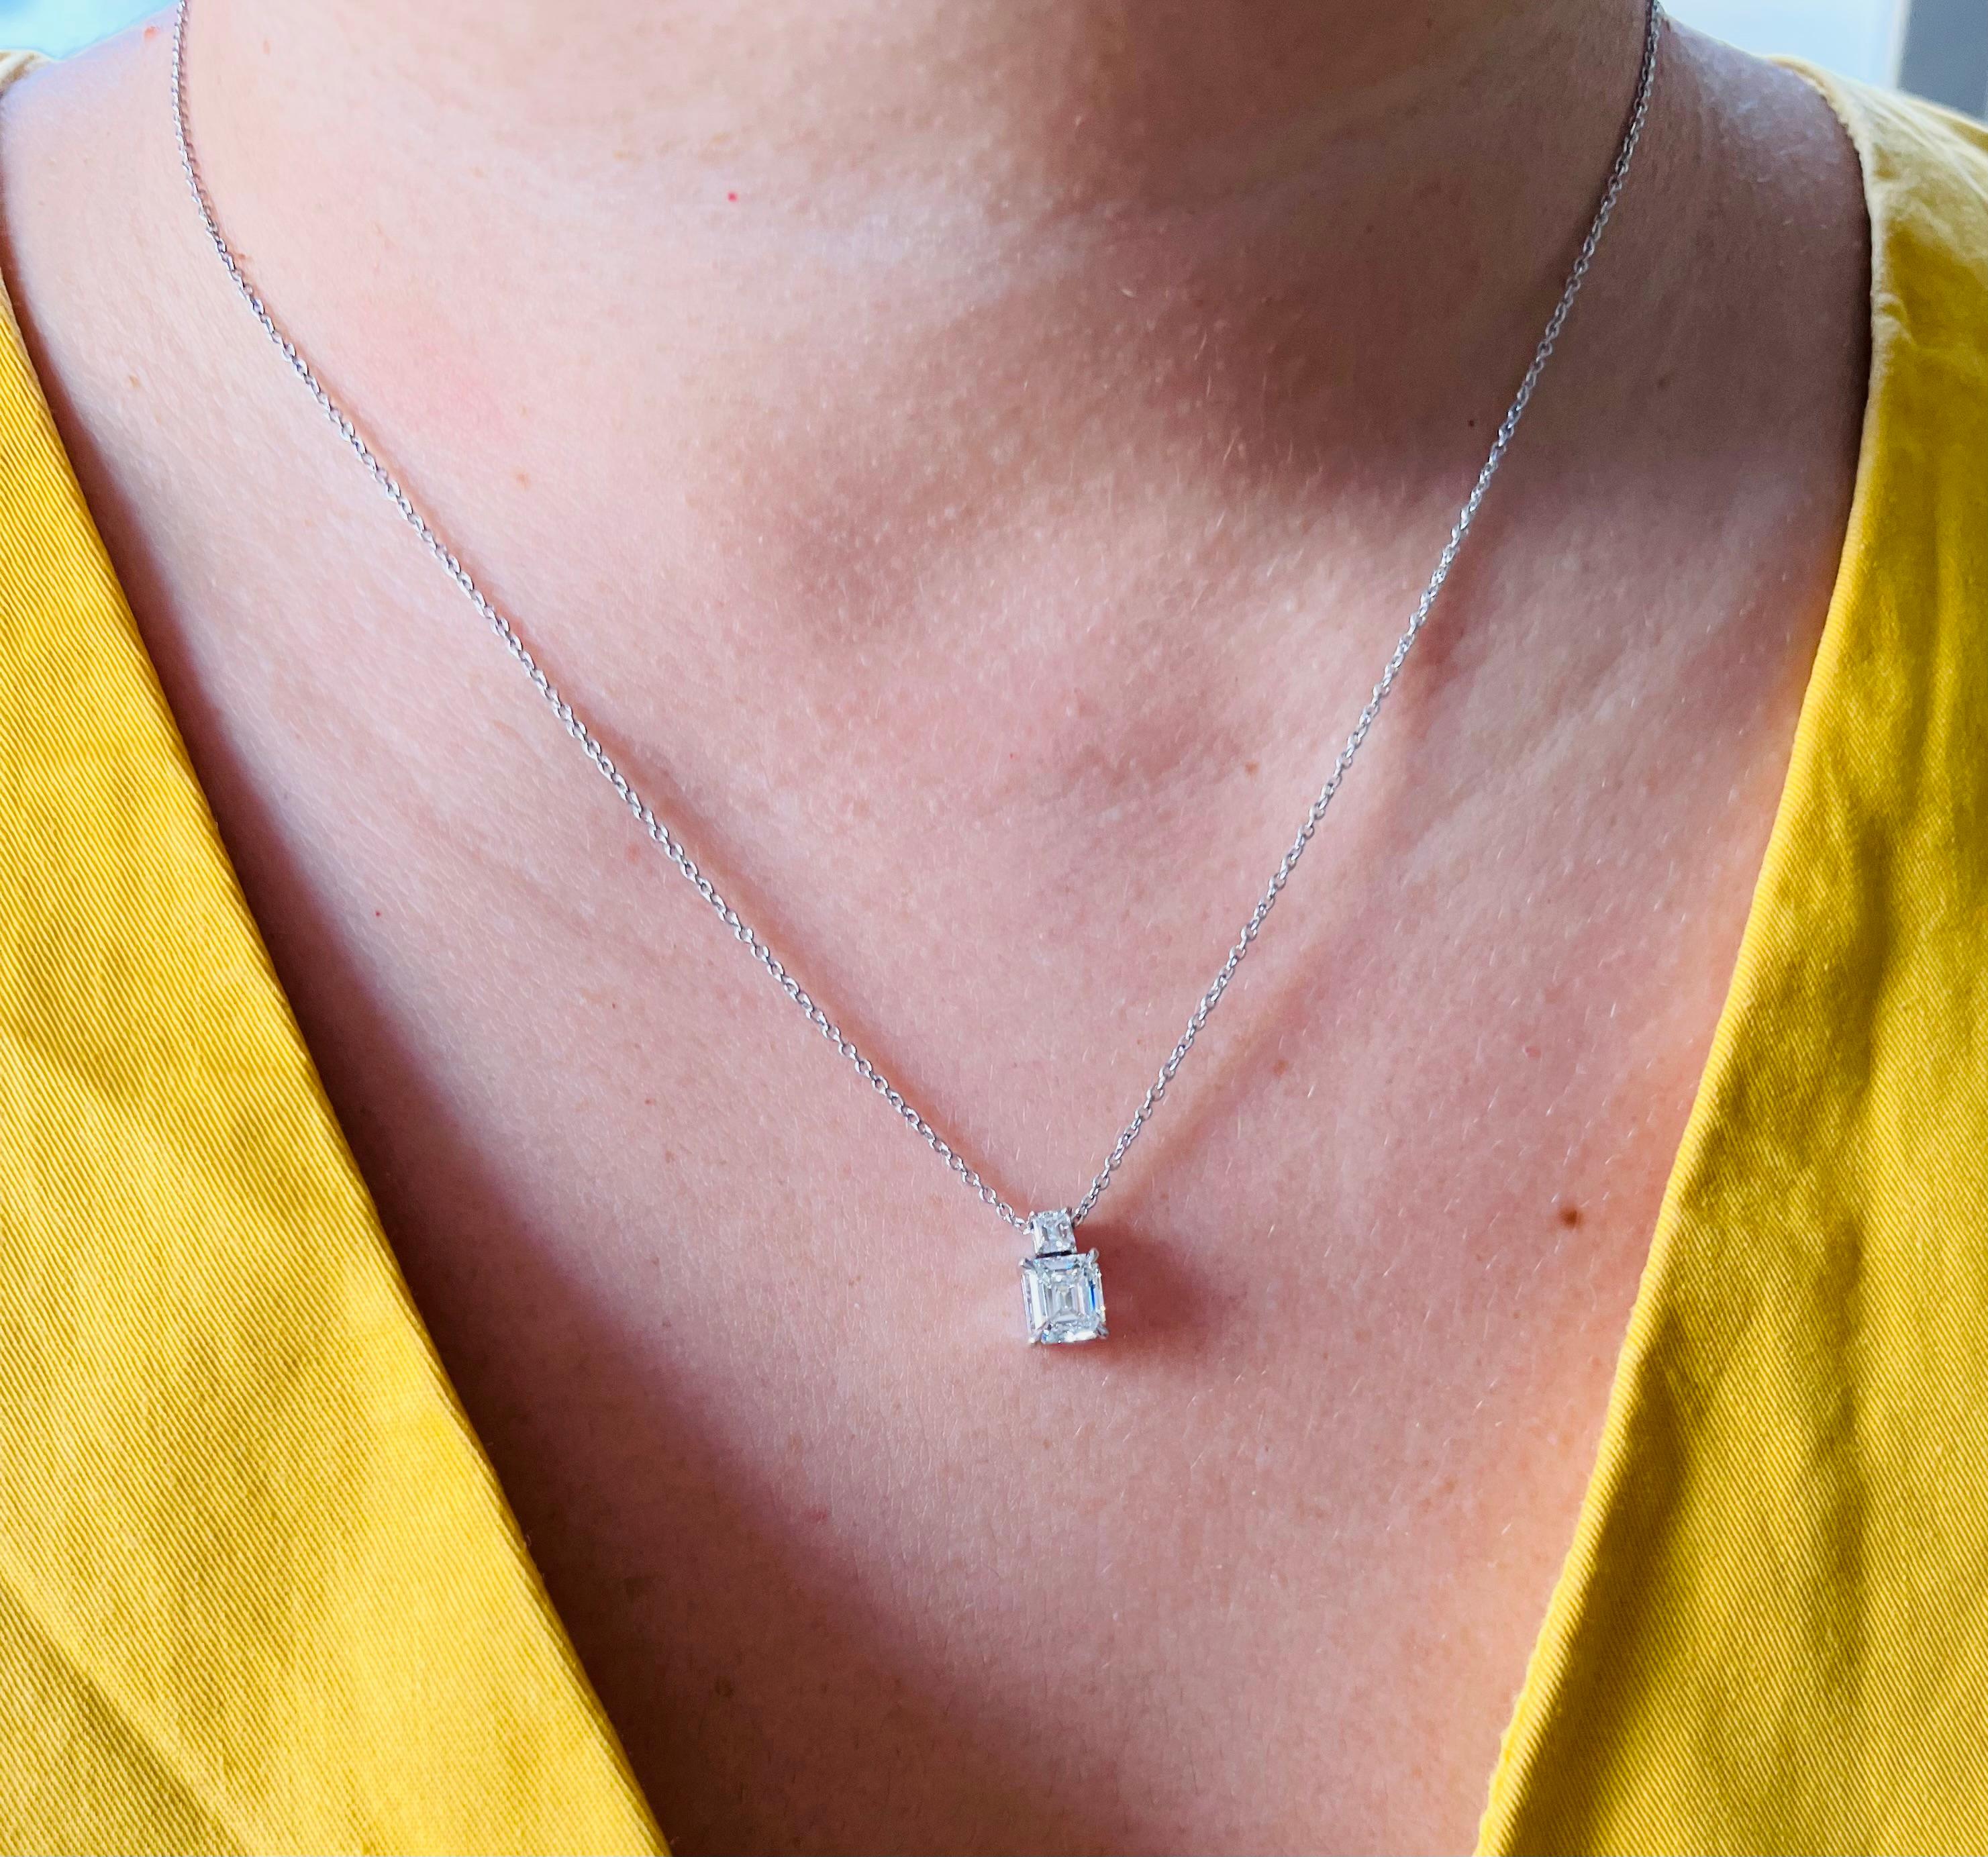 This elegant pendant is a lovely everyday piece and also makes enough of a statement styled for special occasions. The necklace features a GIA certified G color, VS1 clarity 0.90 carat emerald cut diamond. It's stacked with a 0.10 carat emerald cut